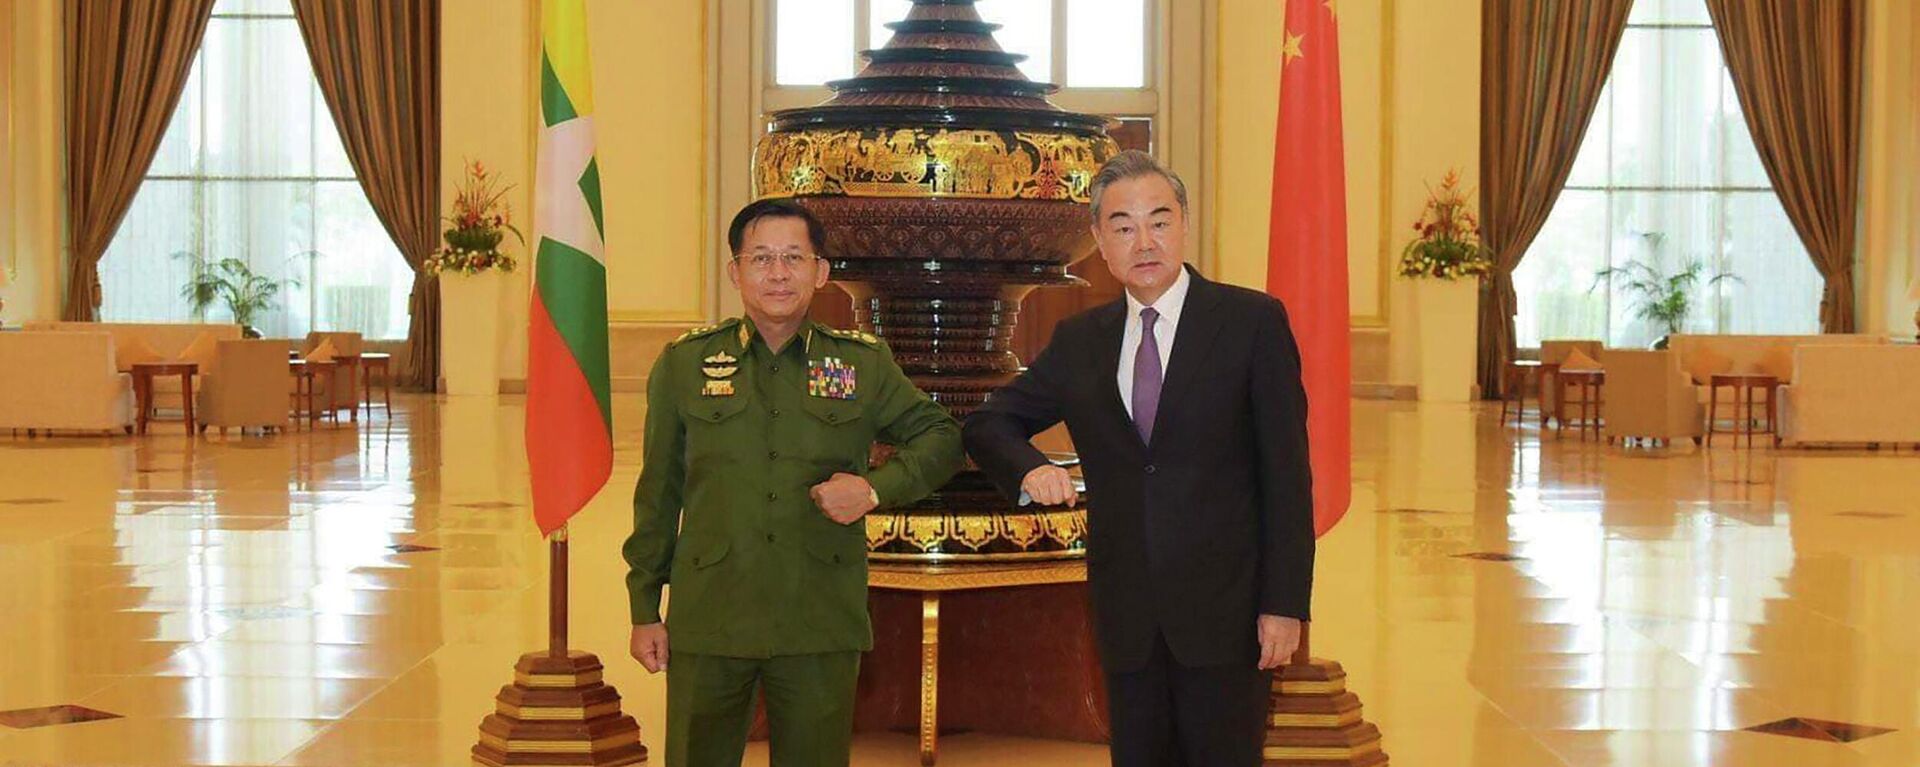 In this Jan. 12, 2021, file photo provided by Myanmar Military Information Team, Myanmar's Army Commander Senior Gen. Min Aung Hlaing, left, and Chinese Foreign Minister Wang Yi pose for a photo during their meeting in Naypyitaw, Myanmar. - Sputnik International, 1920, 29.06.2022